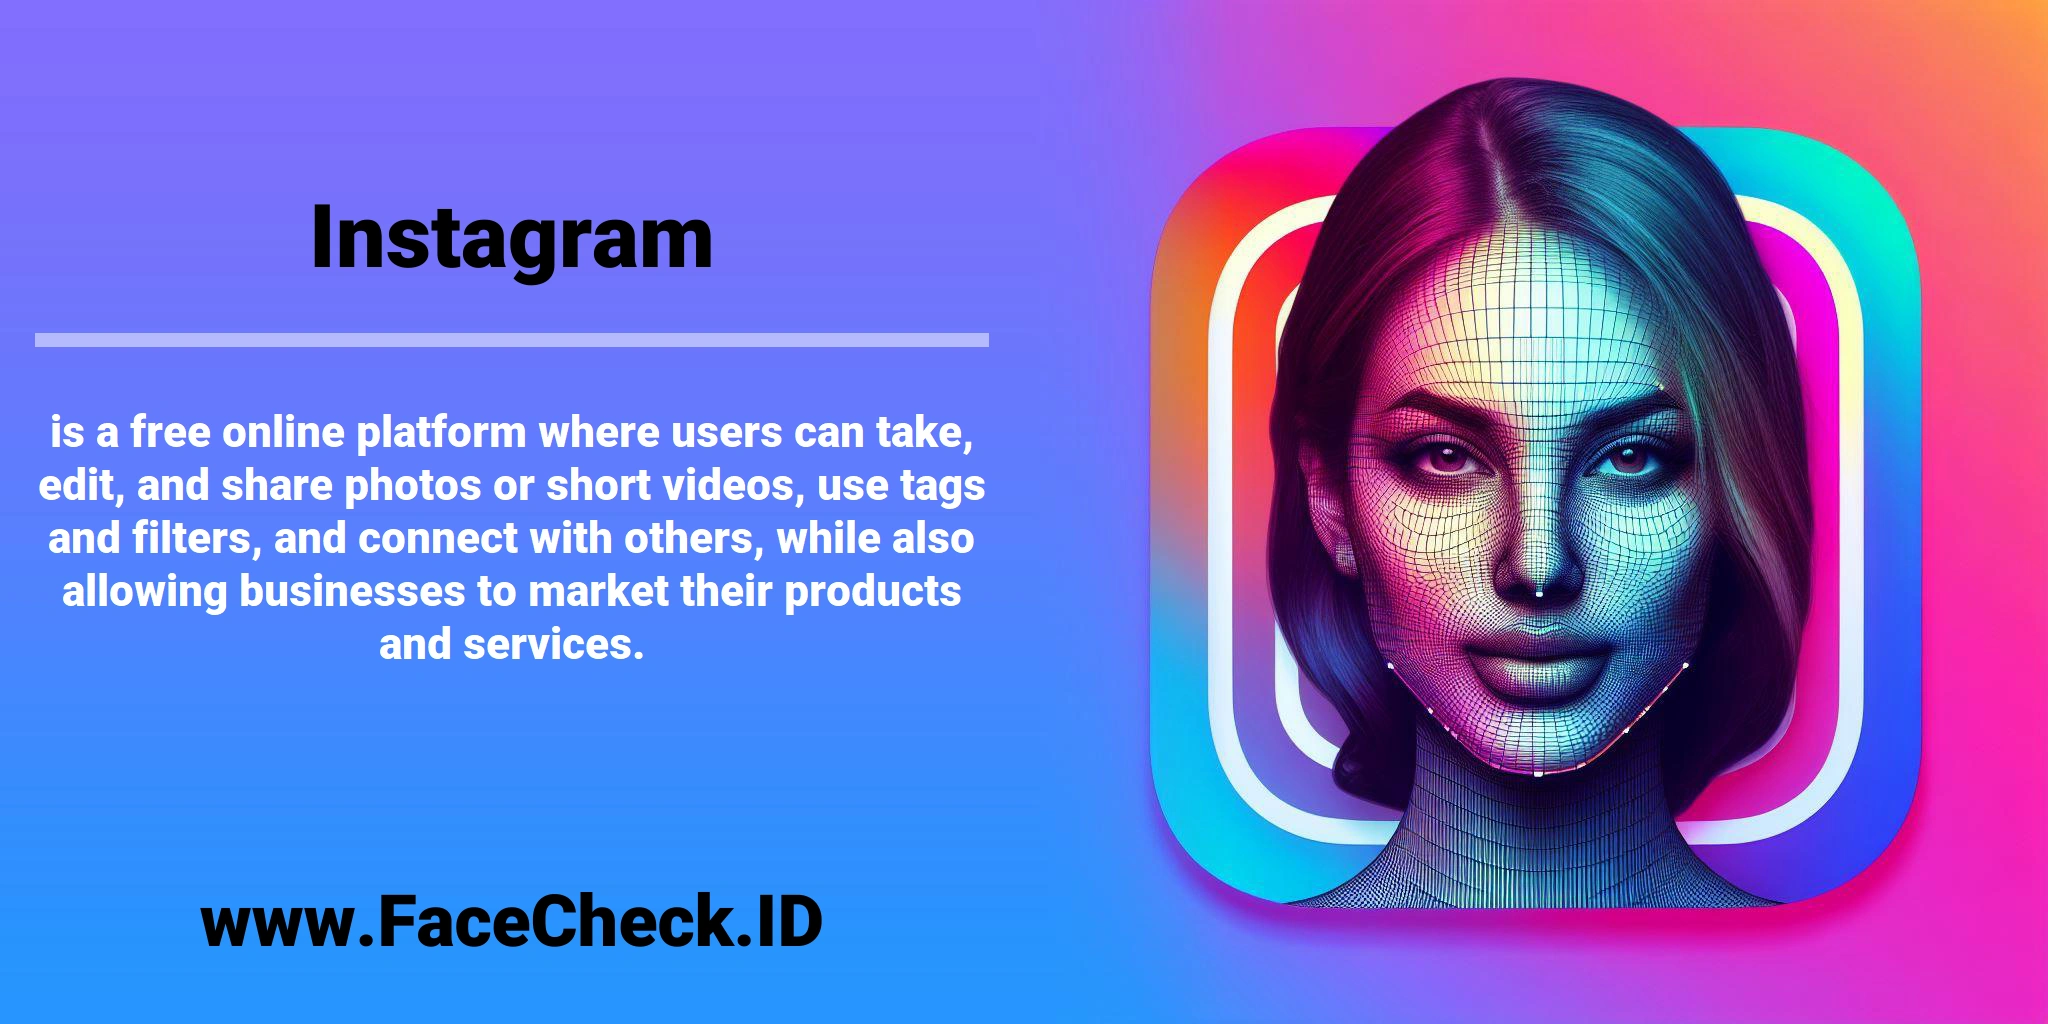 <b>Instagram</b> is a free online platform where users can take, edit, and share photos or short videos, use tags and filters, and connect with others, while also allowing businesses to market their products and services.